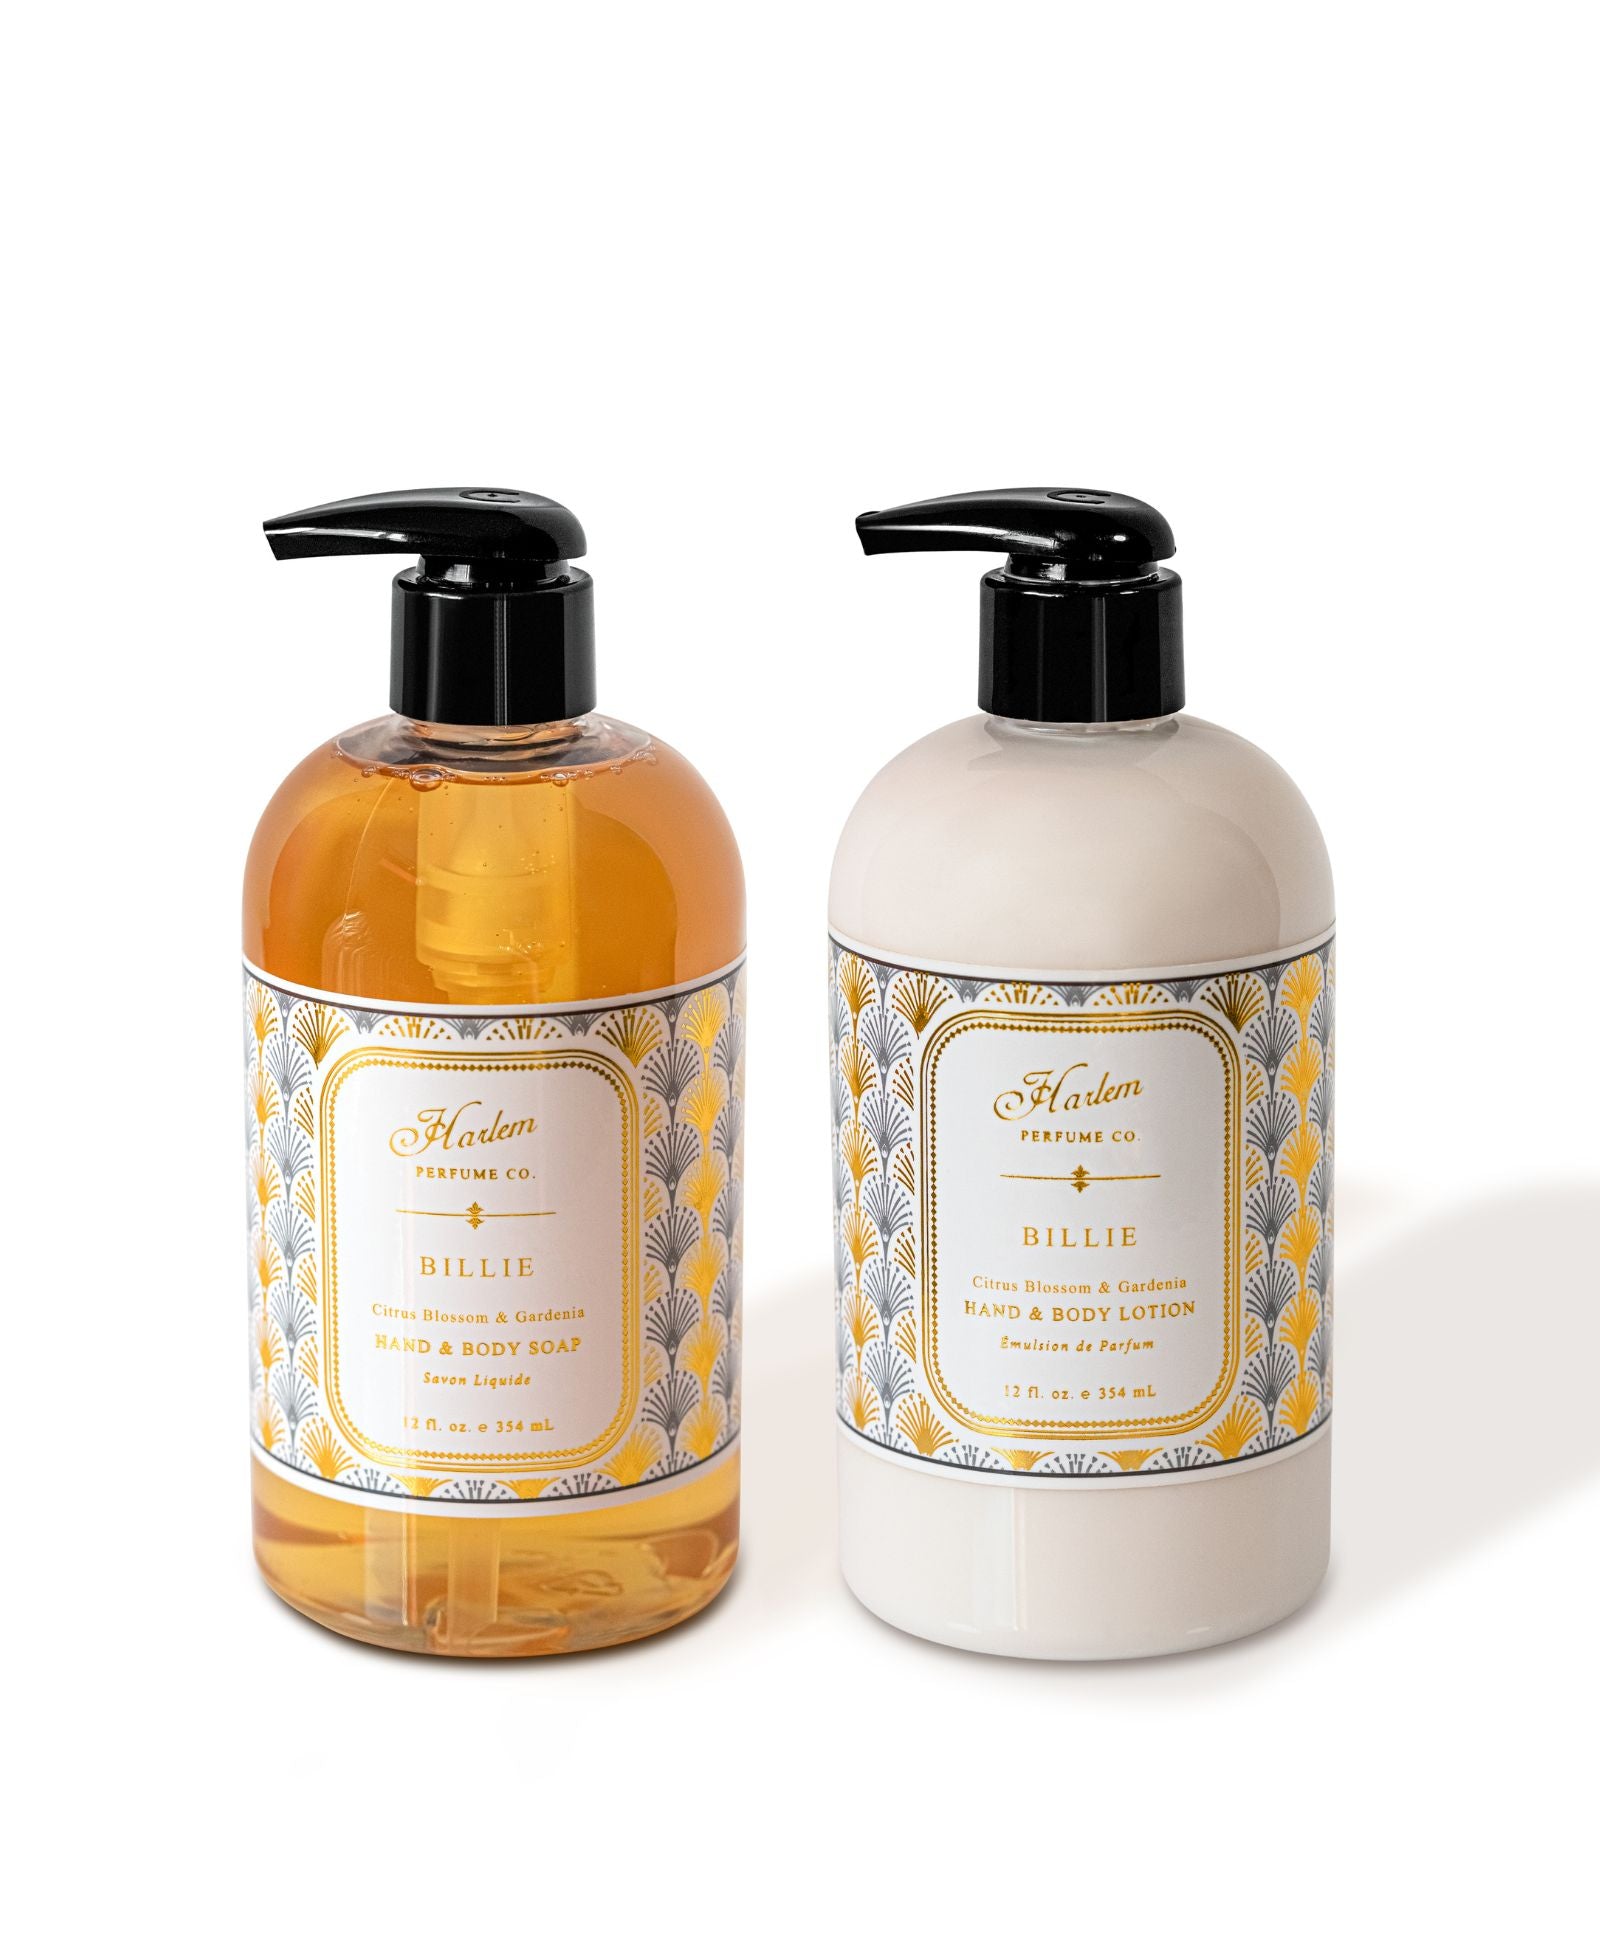 Image of our Billie Soap and Lotion against a White background